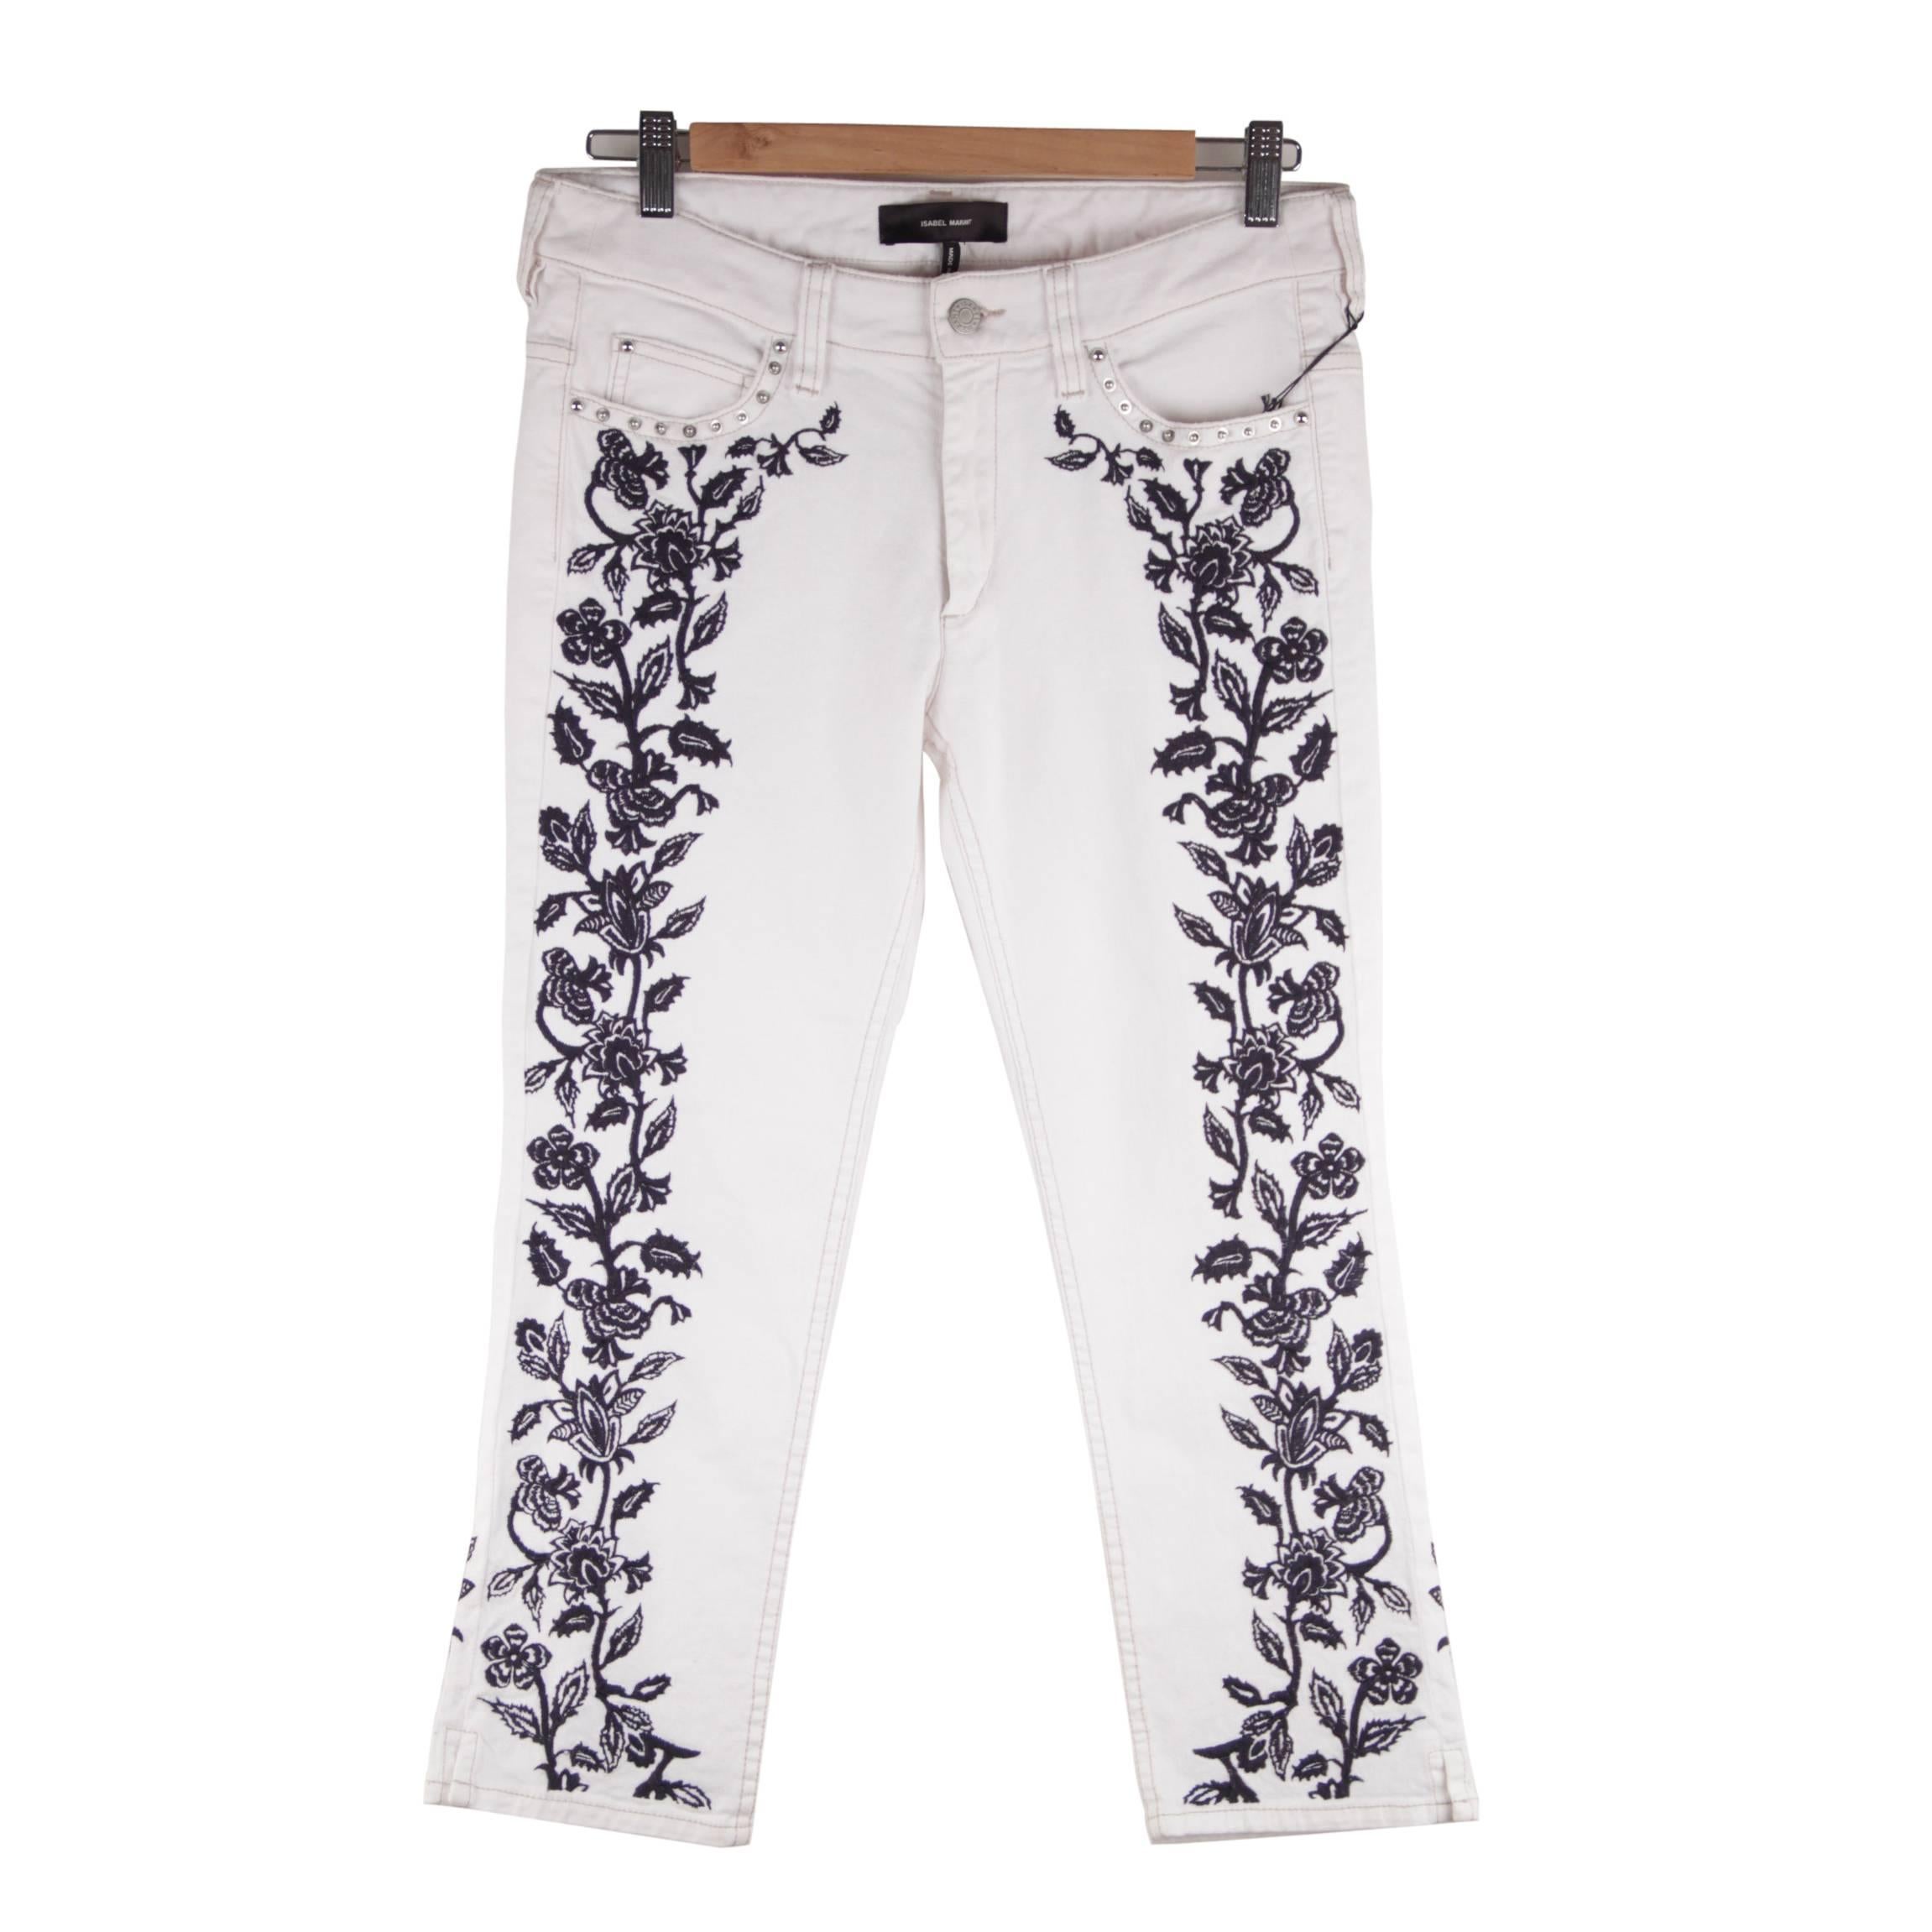 ISABEL MARANT White EMBROIDERED Cotton CROPPED Skinny JEANS Pants Sz 38 